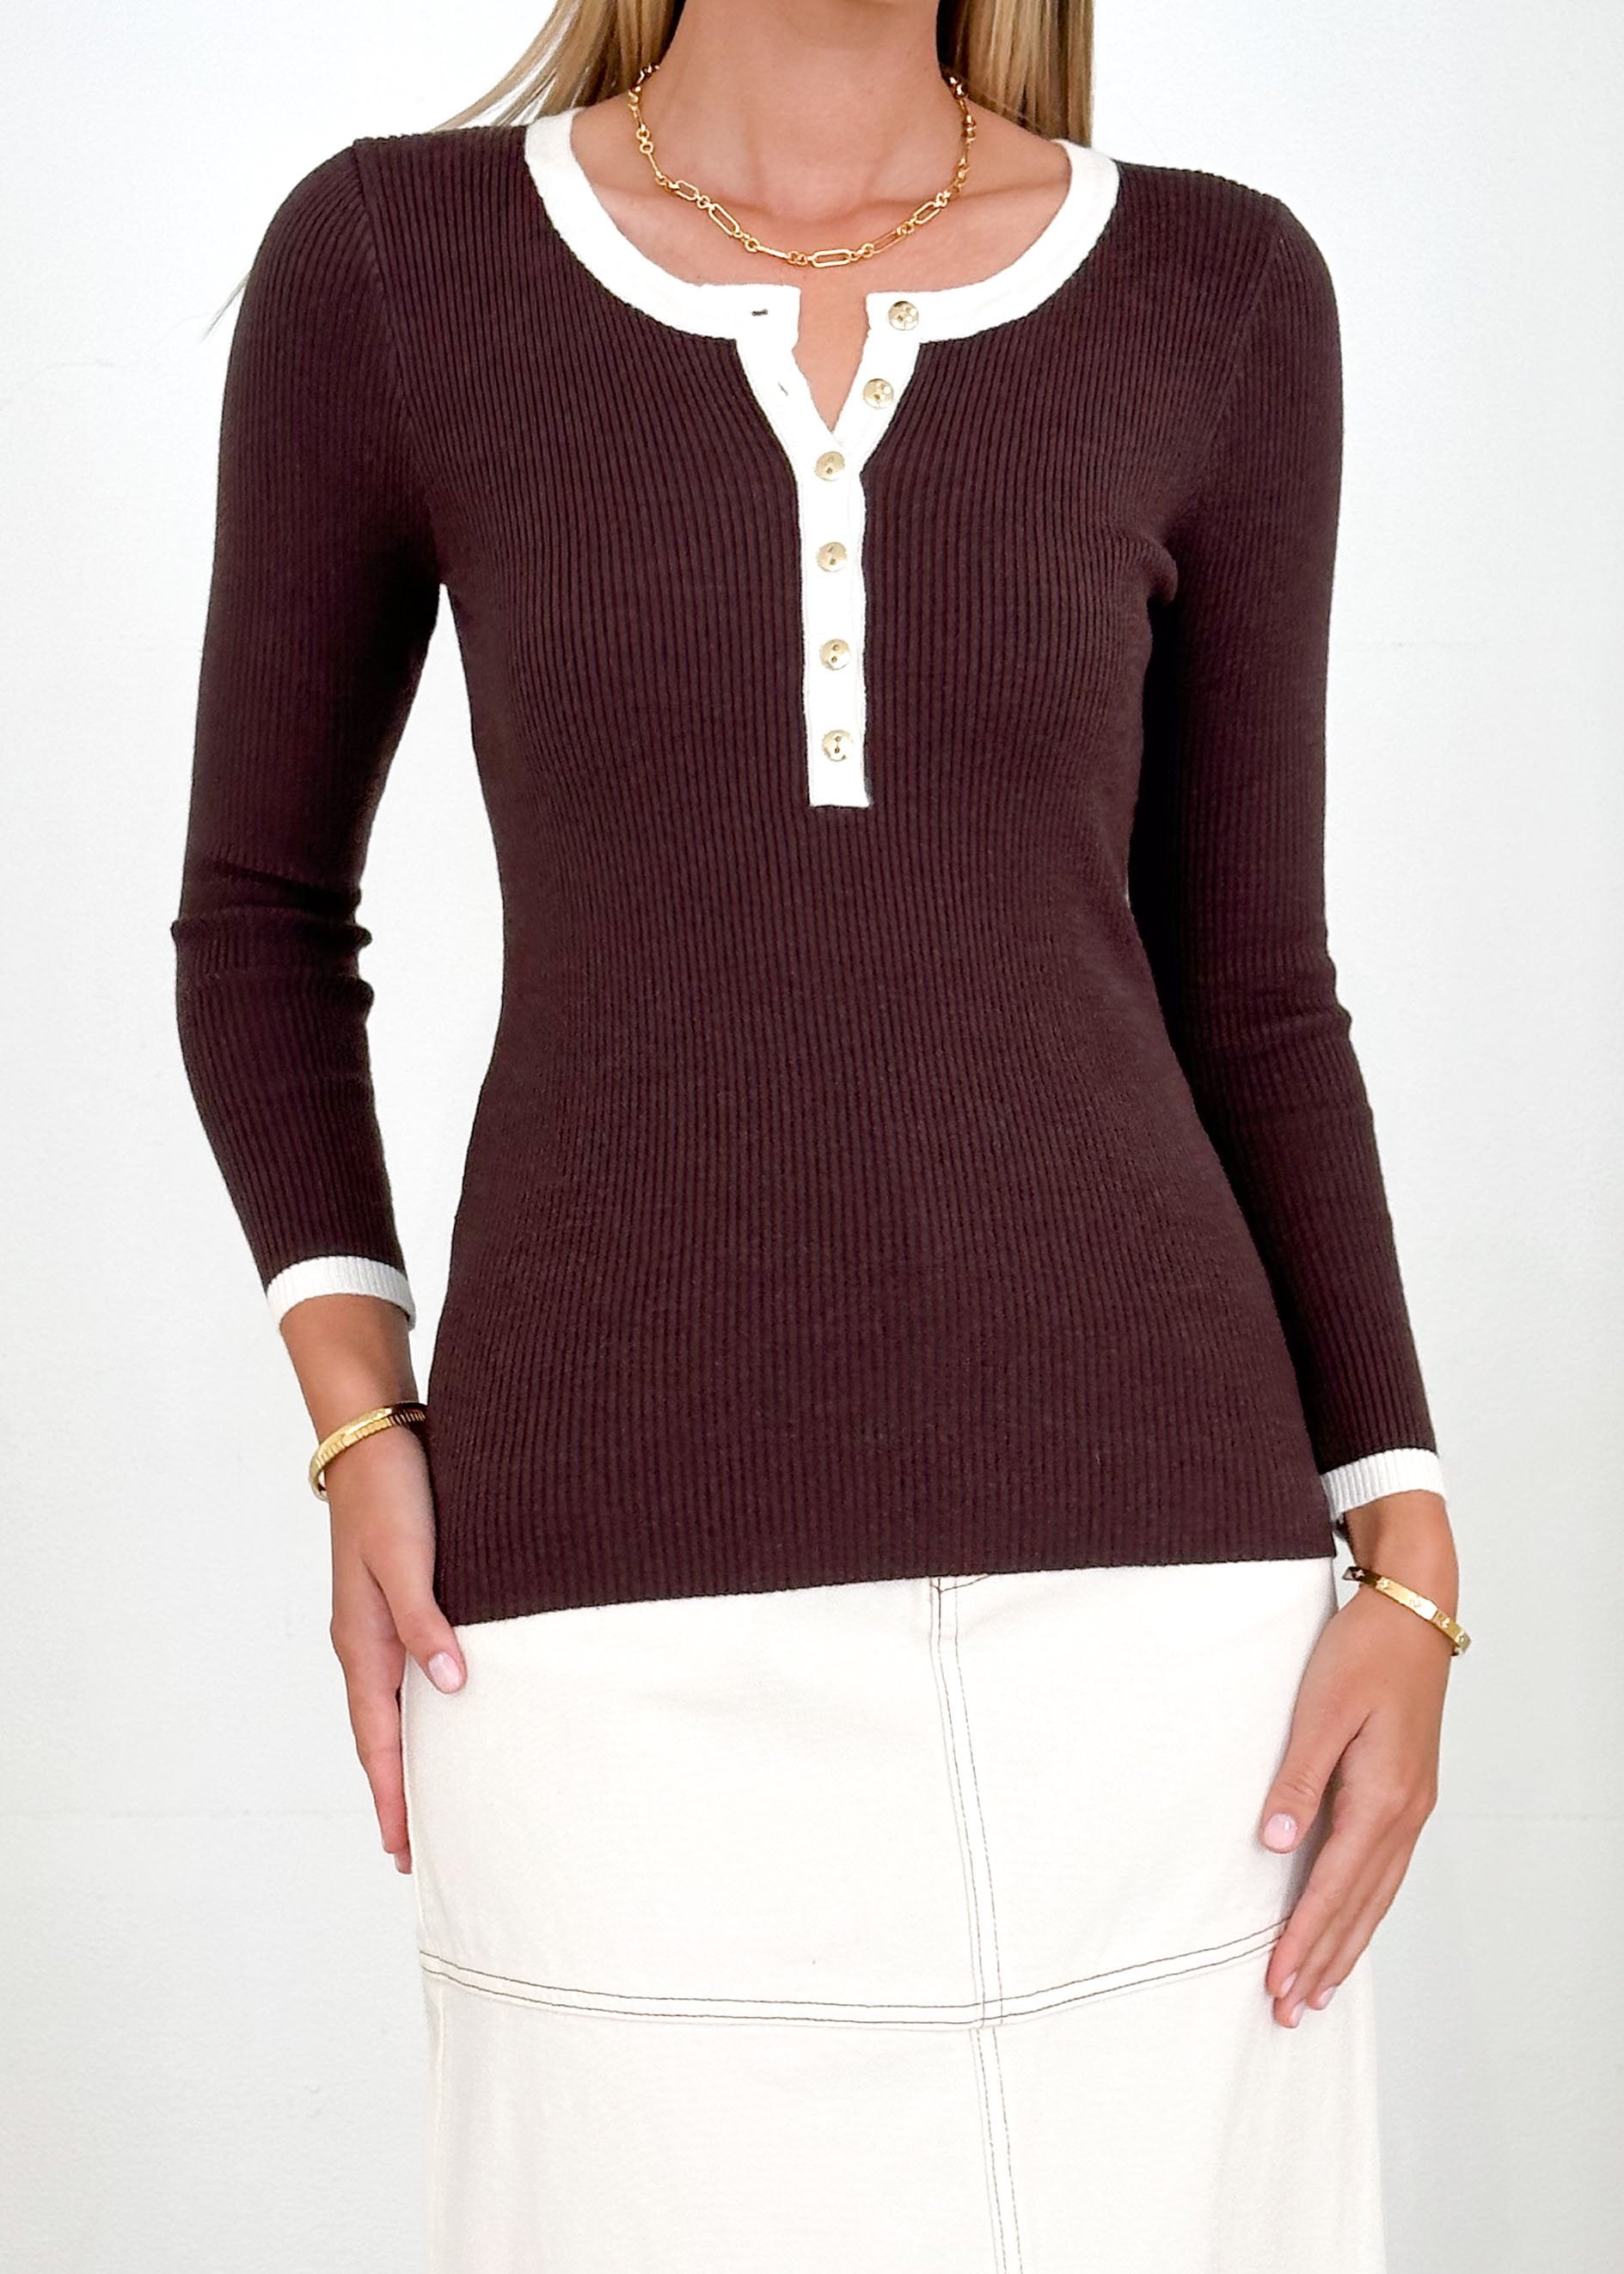 Letra Knit Top - Chocolate